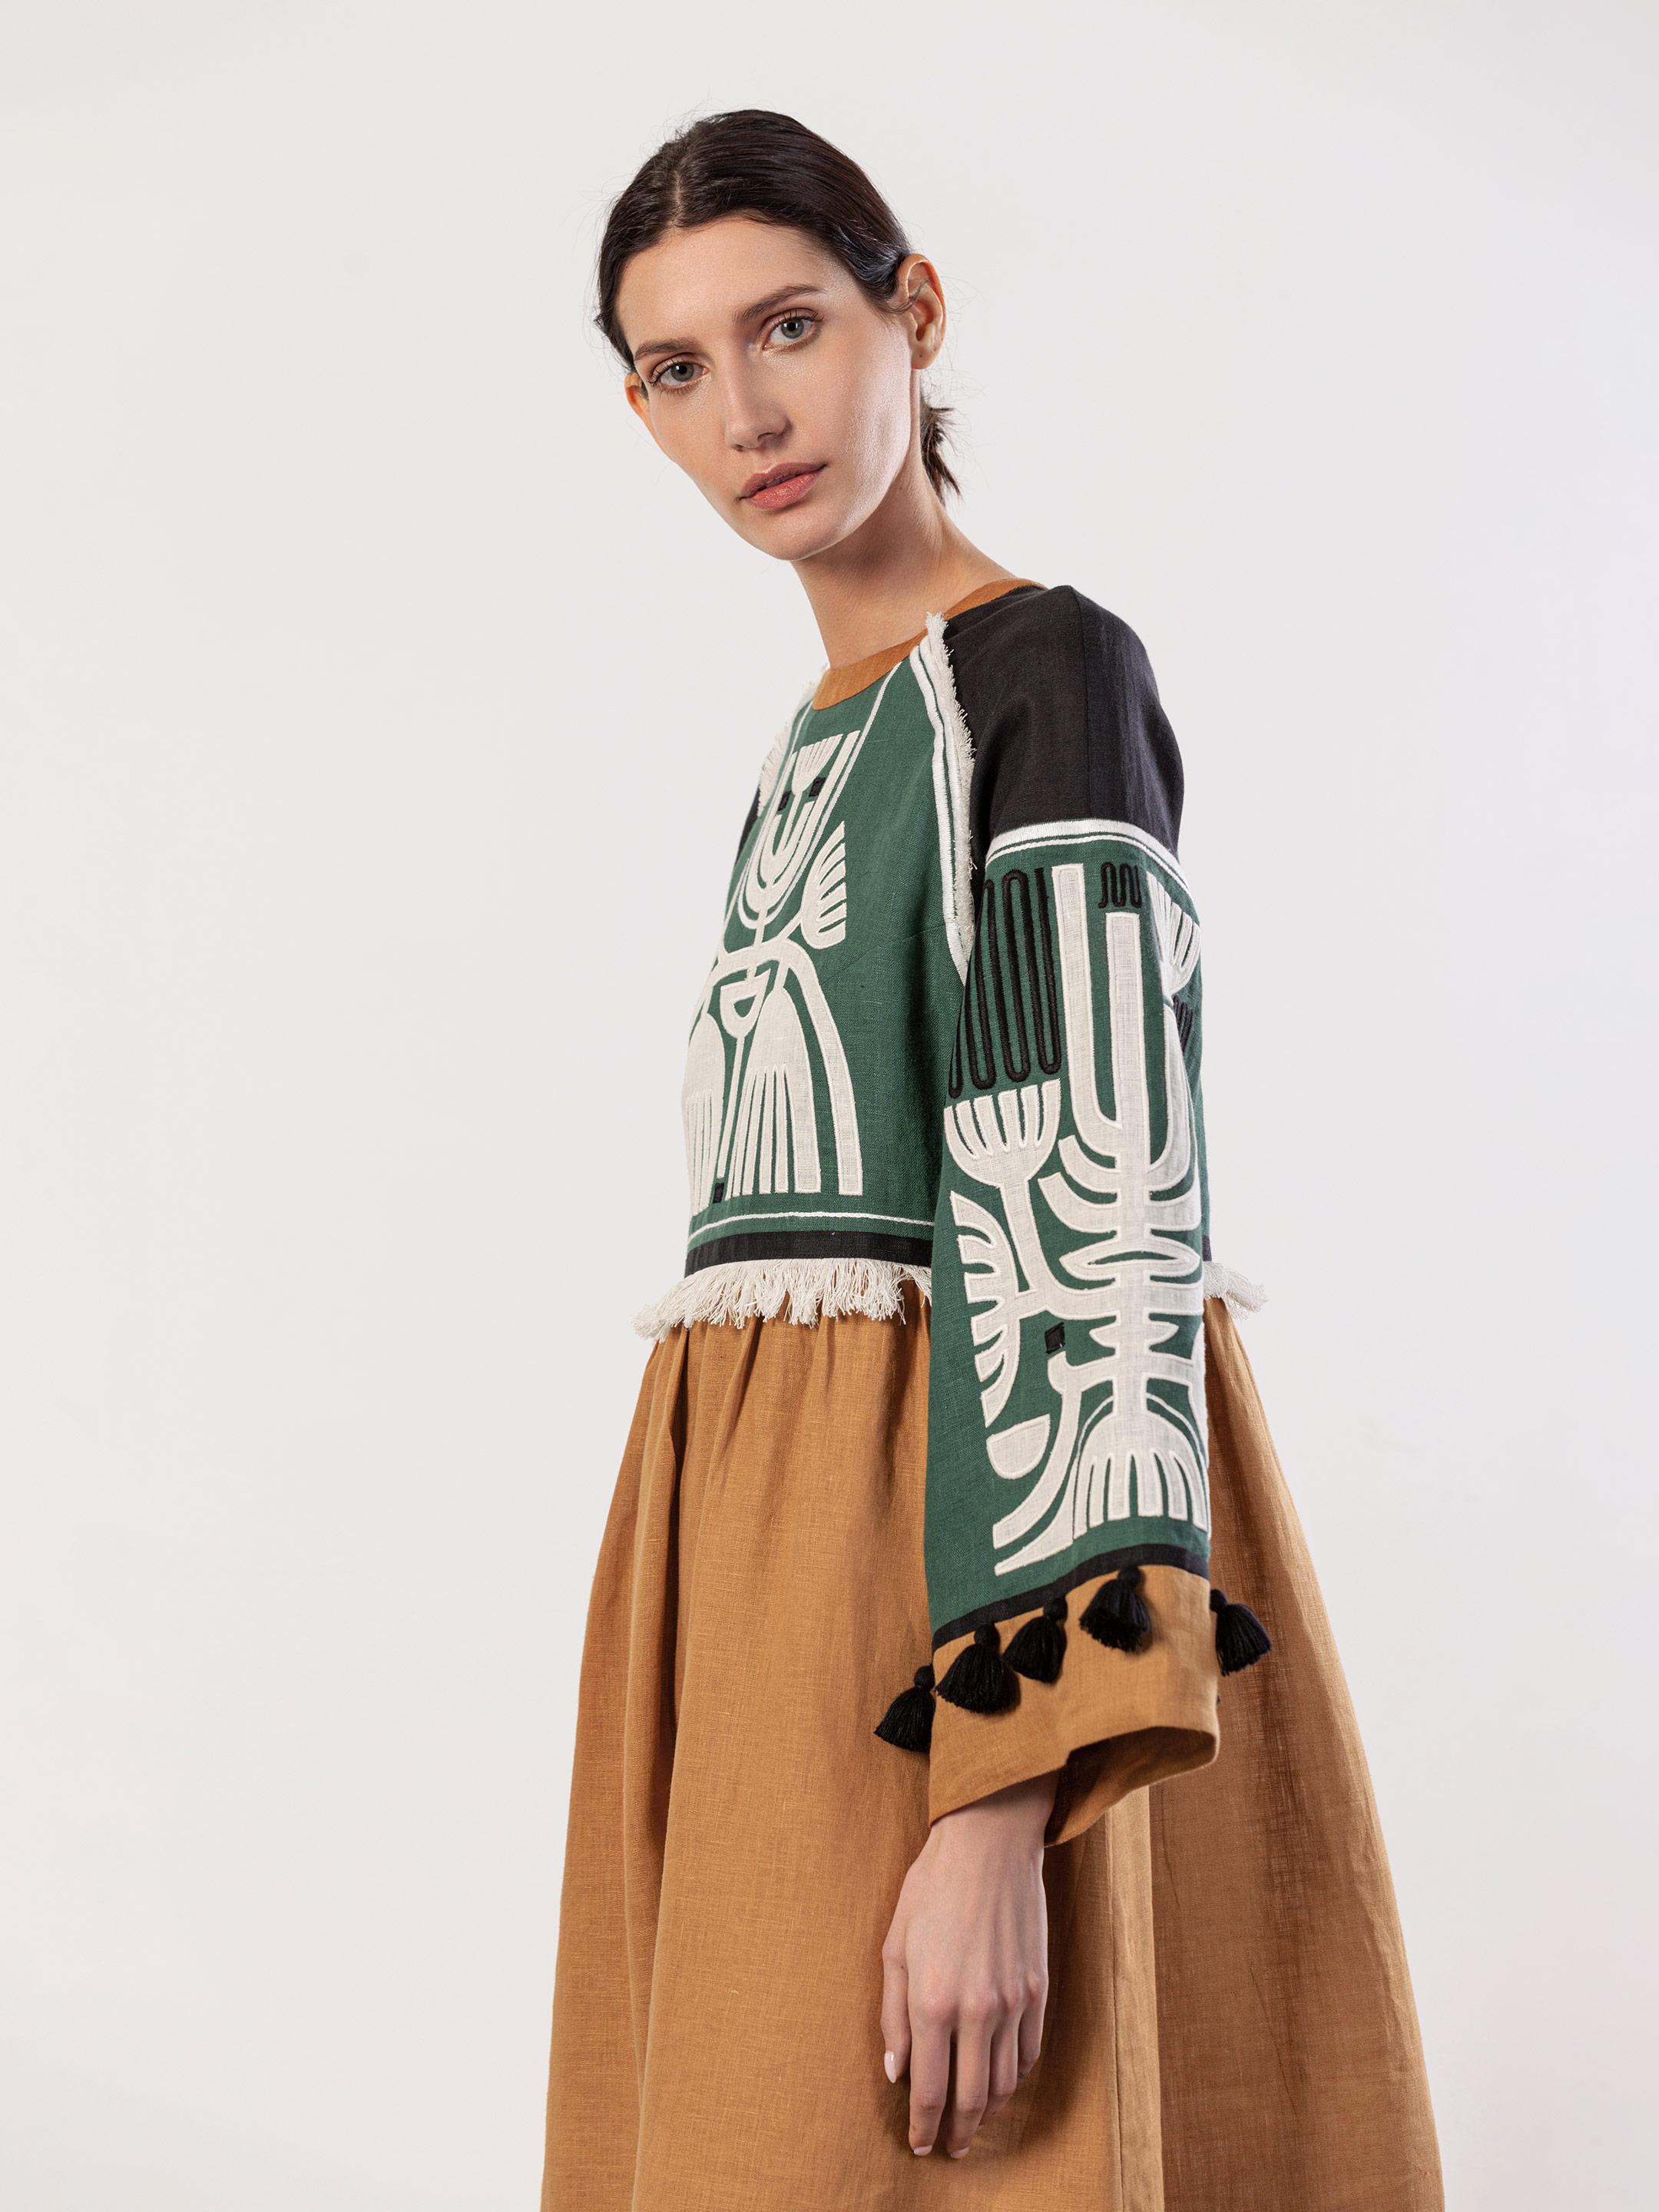 Green dress with black applique and embroidery VILHA buy in Kyiv